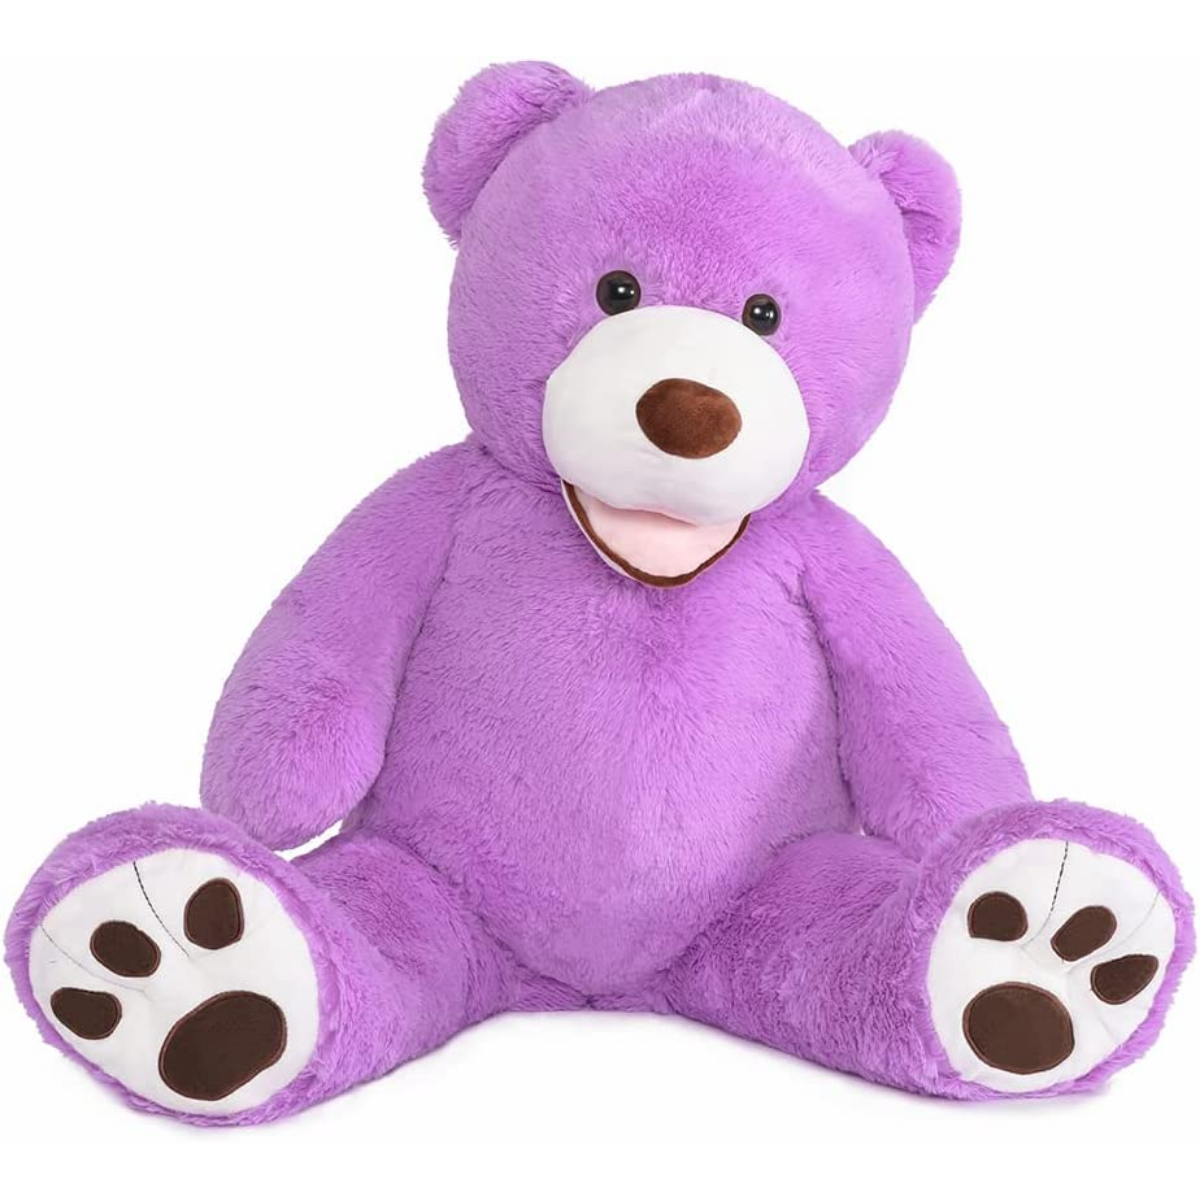 Giant Teddy Bear with Big Footprints Stuffed Toy, 39 Inches